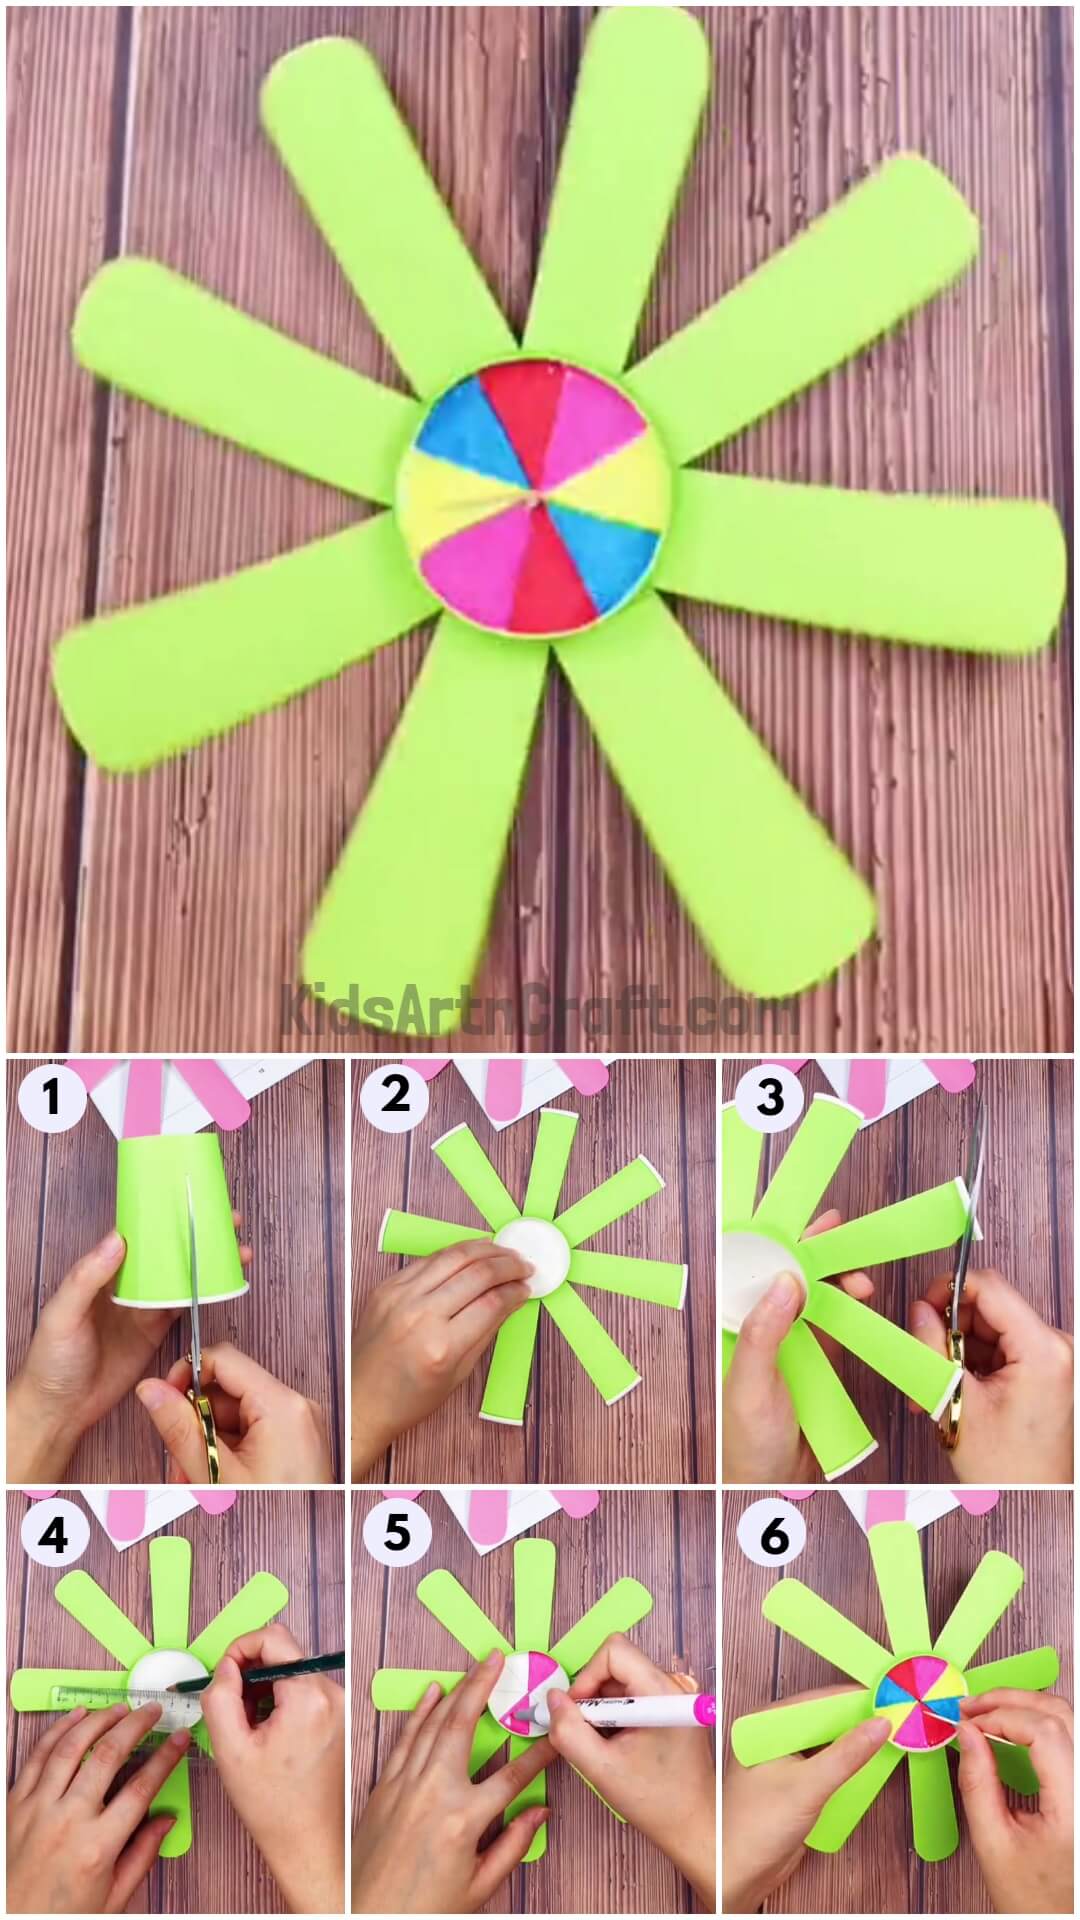 Paper Cup Helicopter Fan Propeller Craft Step by Step Tutorial